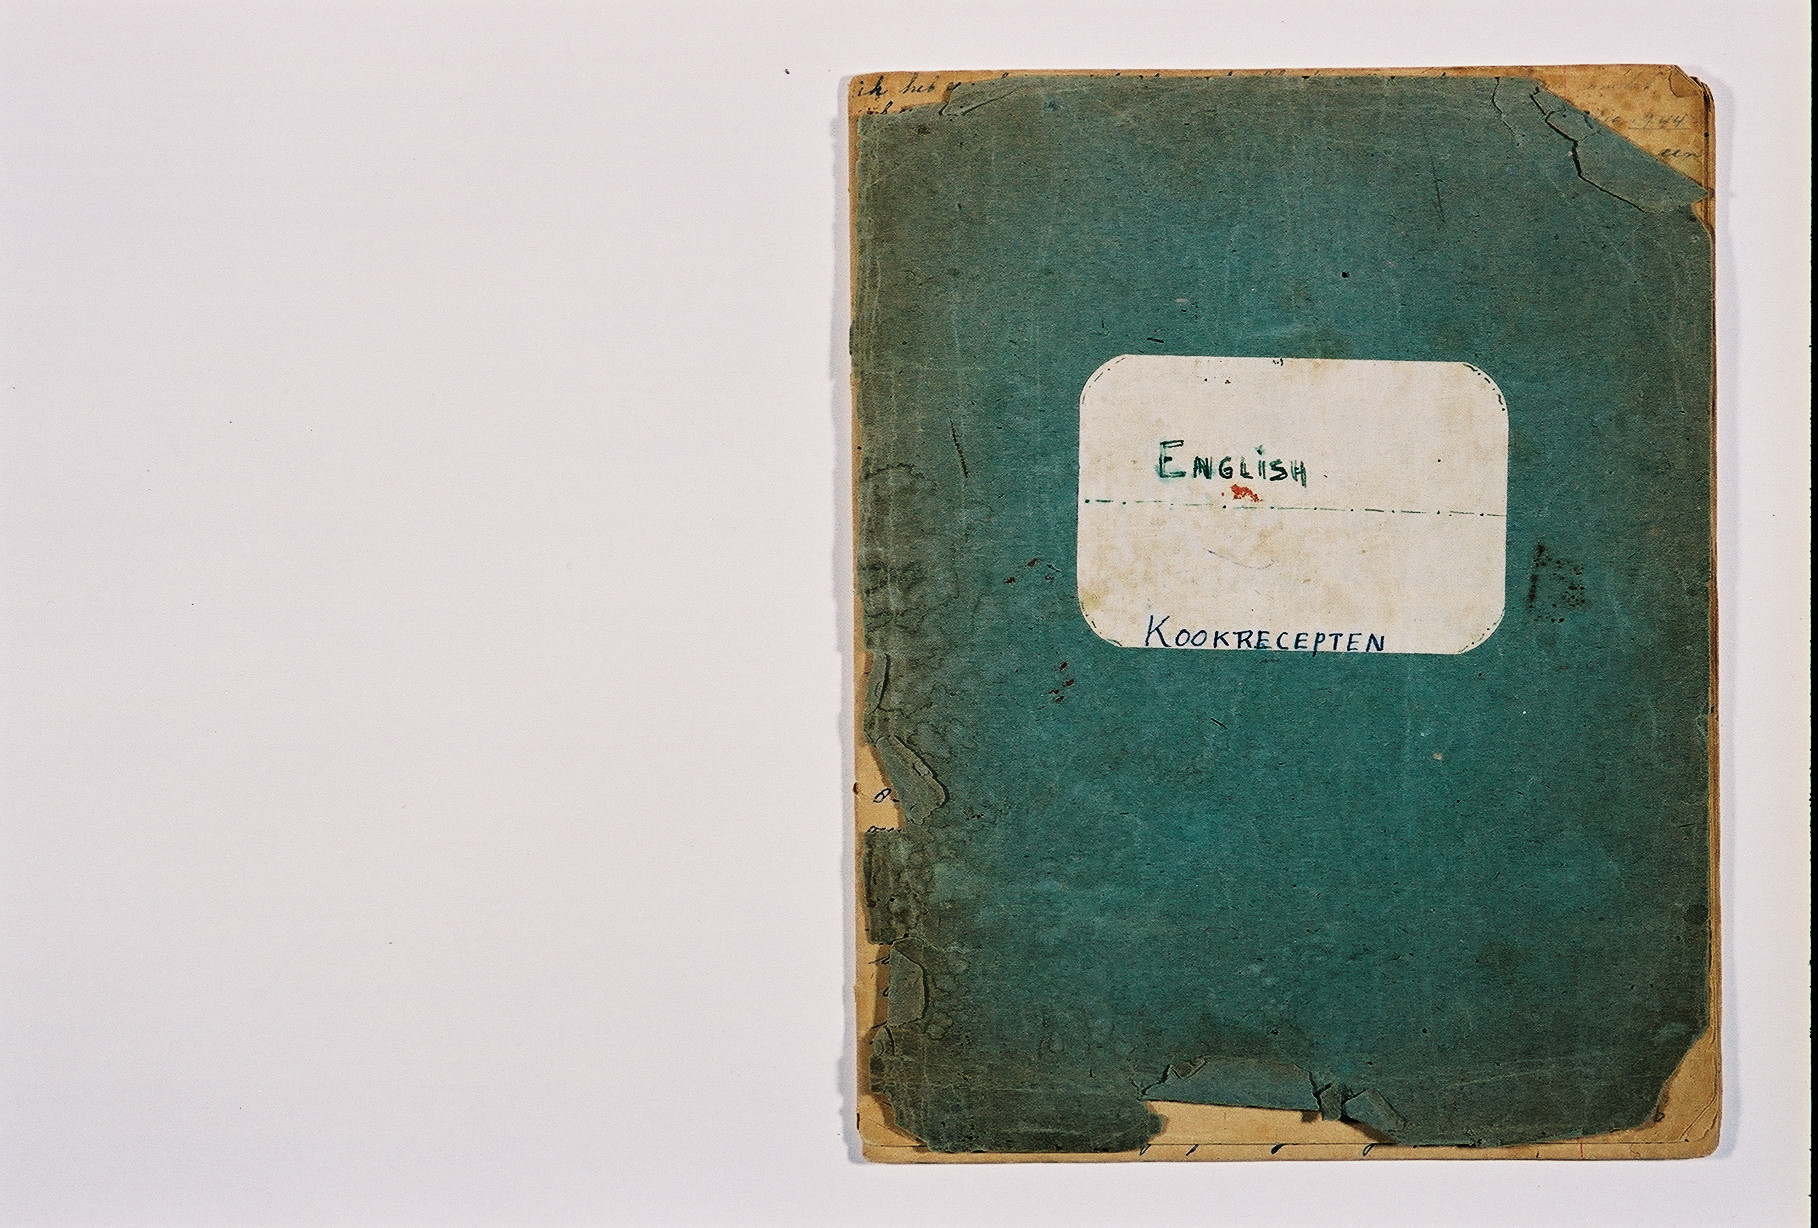 The cover of a diary written by Susie Grunbaum Schwarz while in hiding.  She disguised the diary in the form of a cookbook written in several languages.